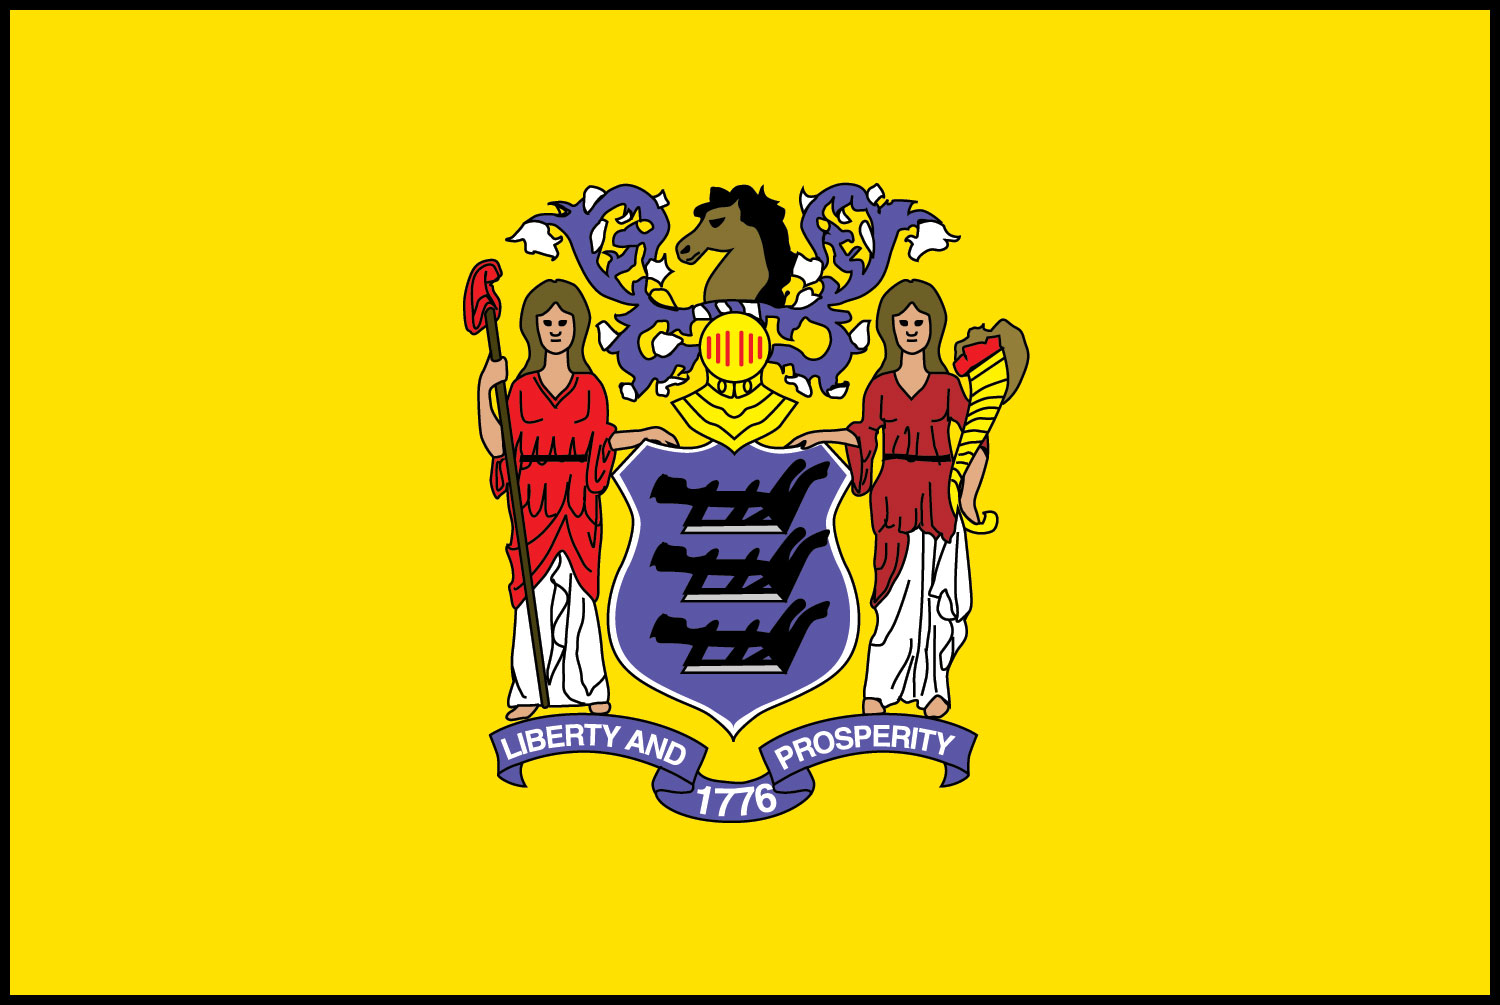 New Jersey Prayer of the Day - Today's prayer focuses on praying for the state of New Jersey. #NewJersey